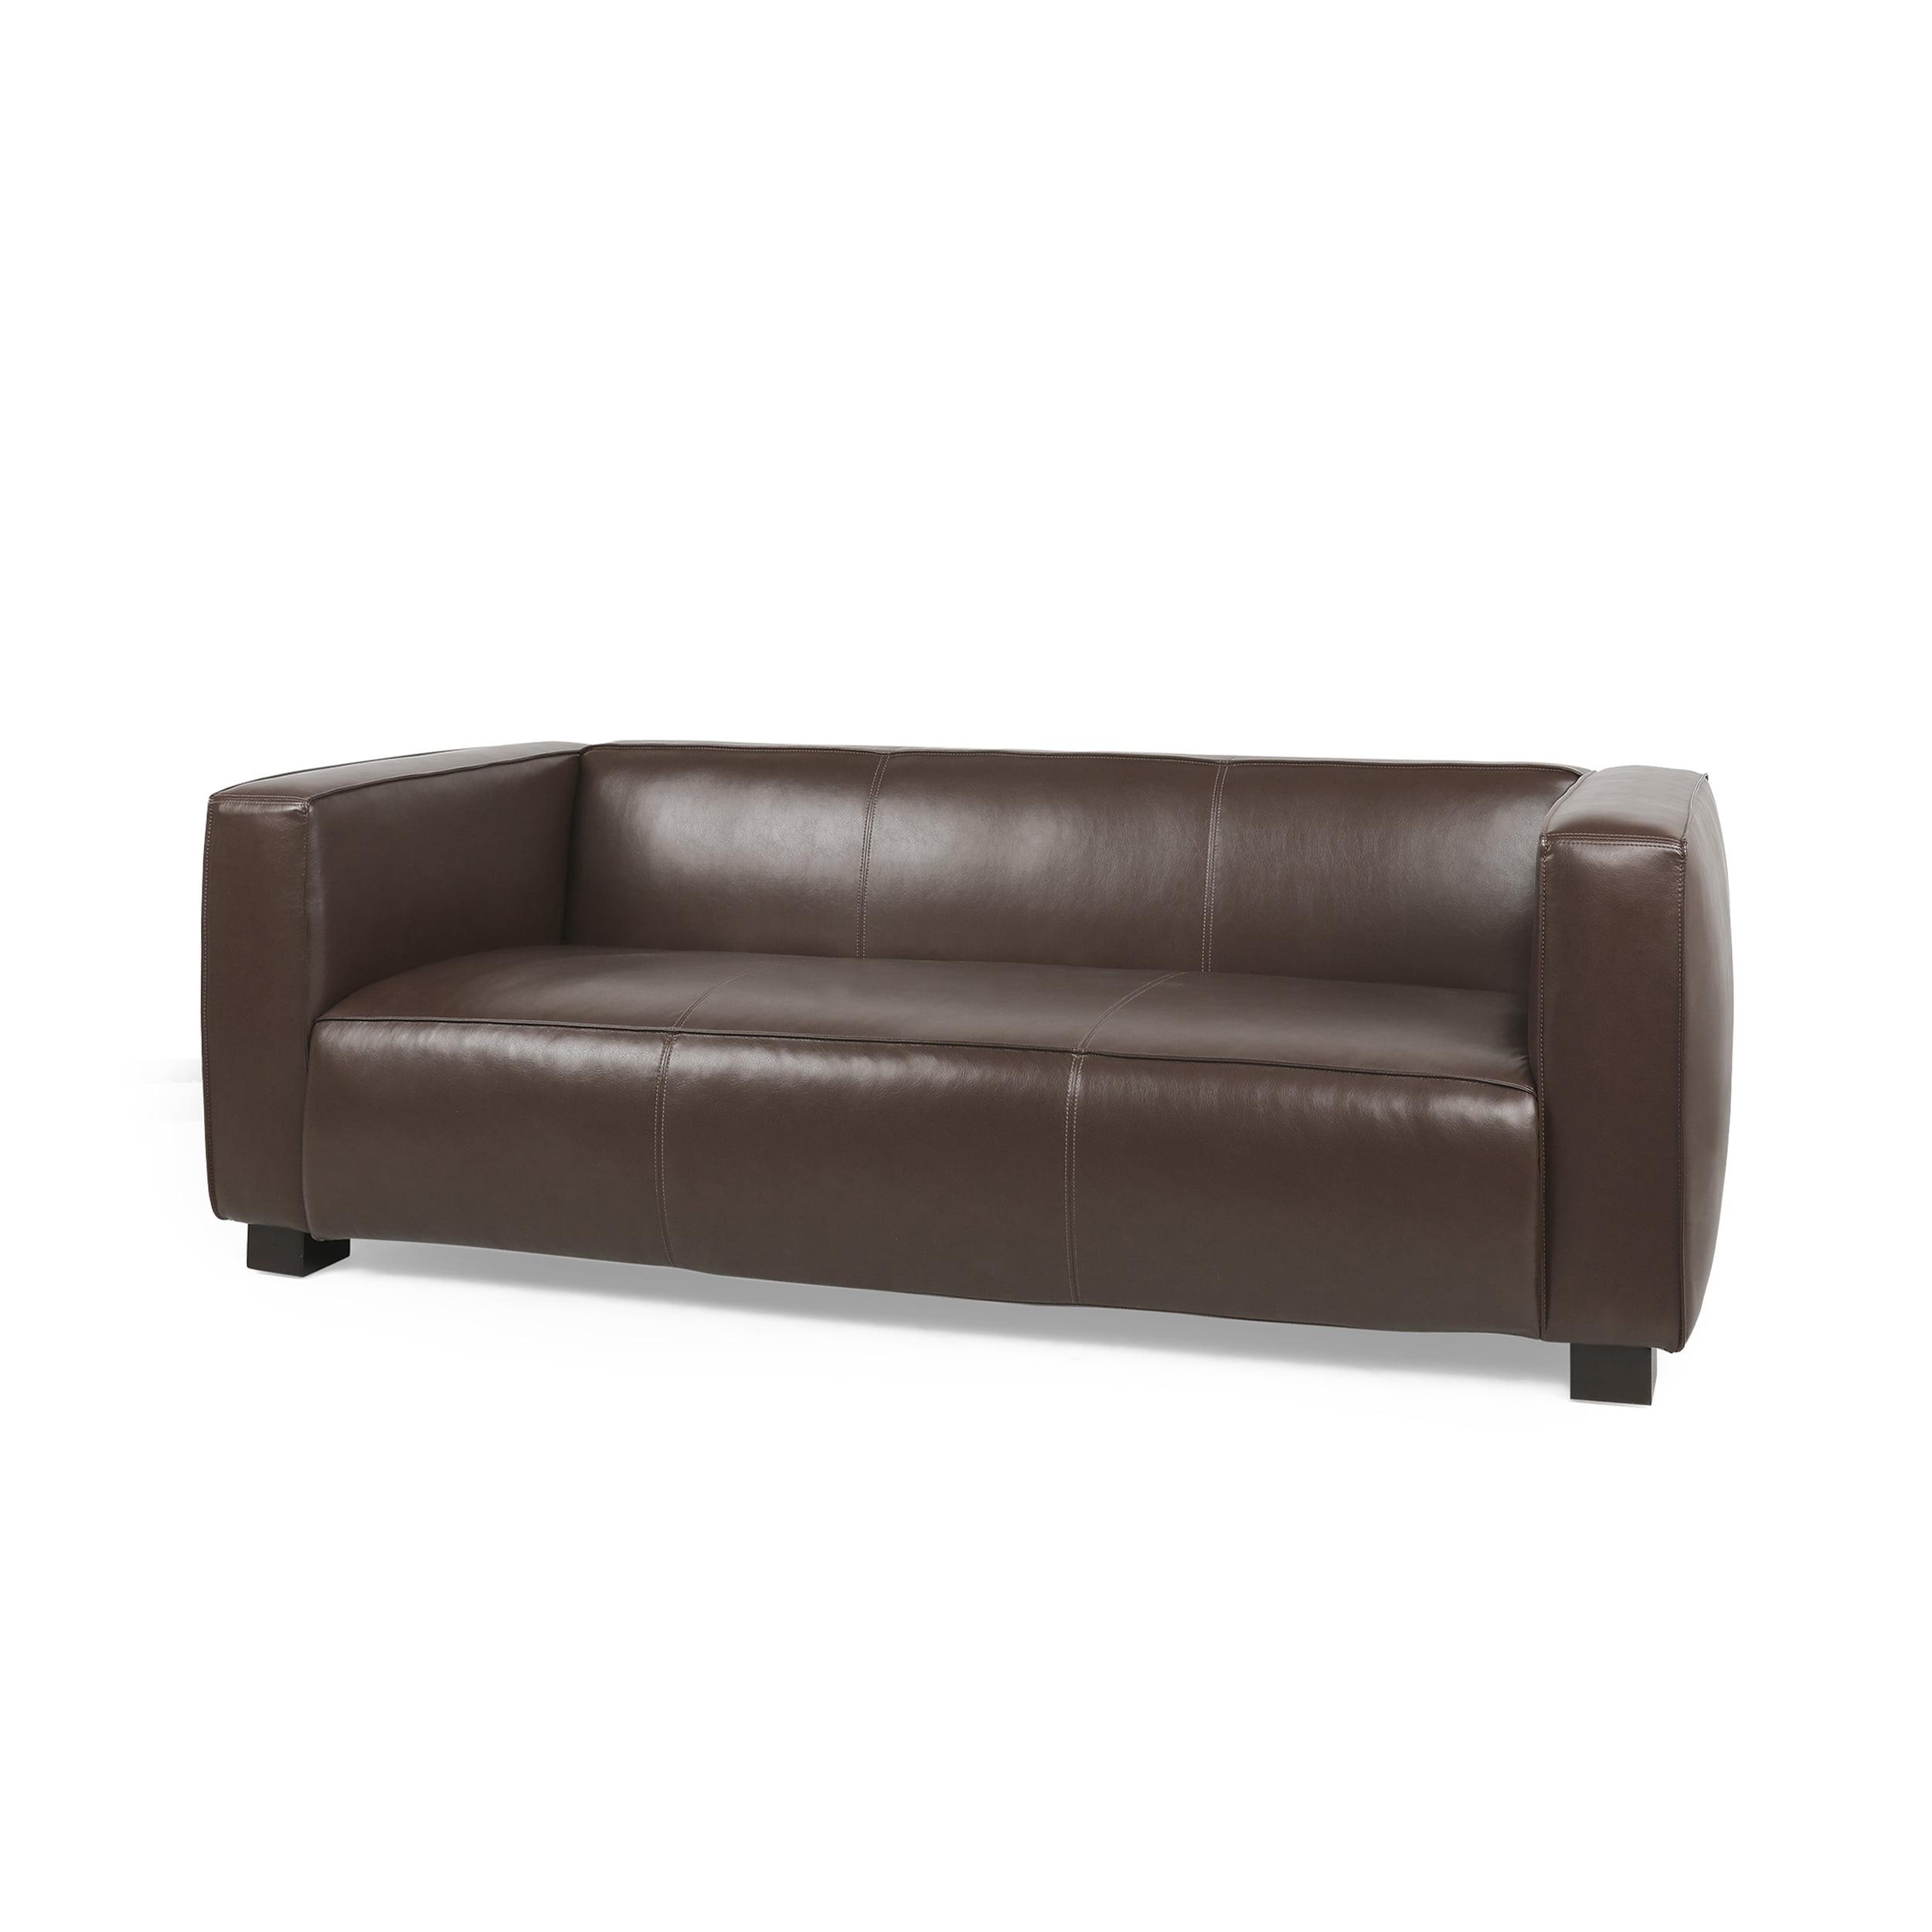 Luxurious Dark Brown Faux Leather Lawson 3-Seater Sofa with Tapered Legs